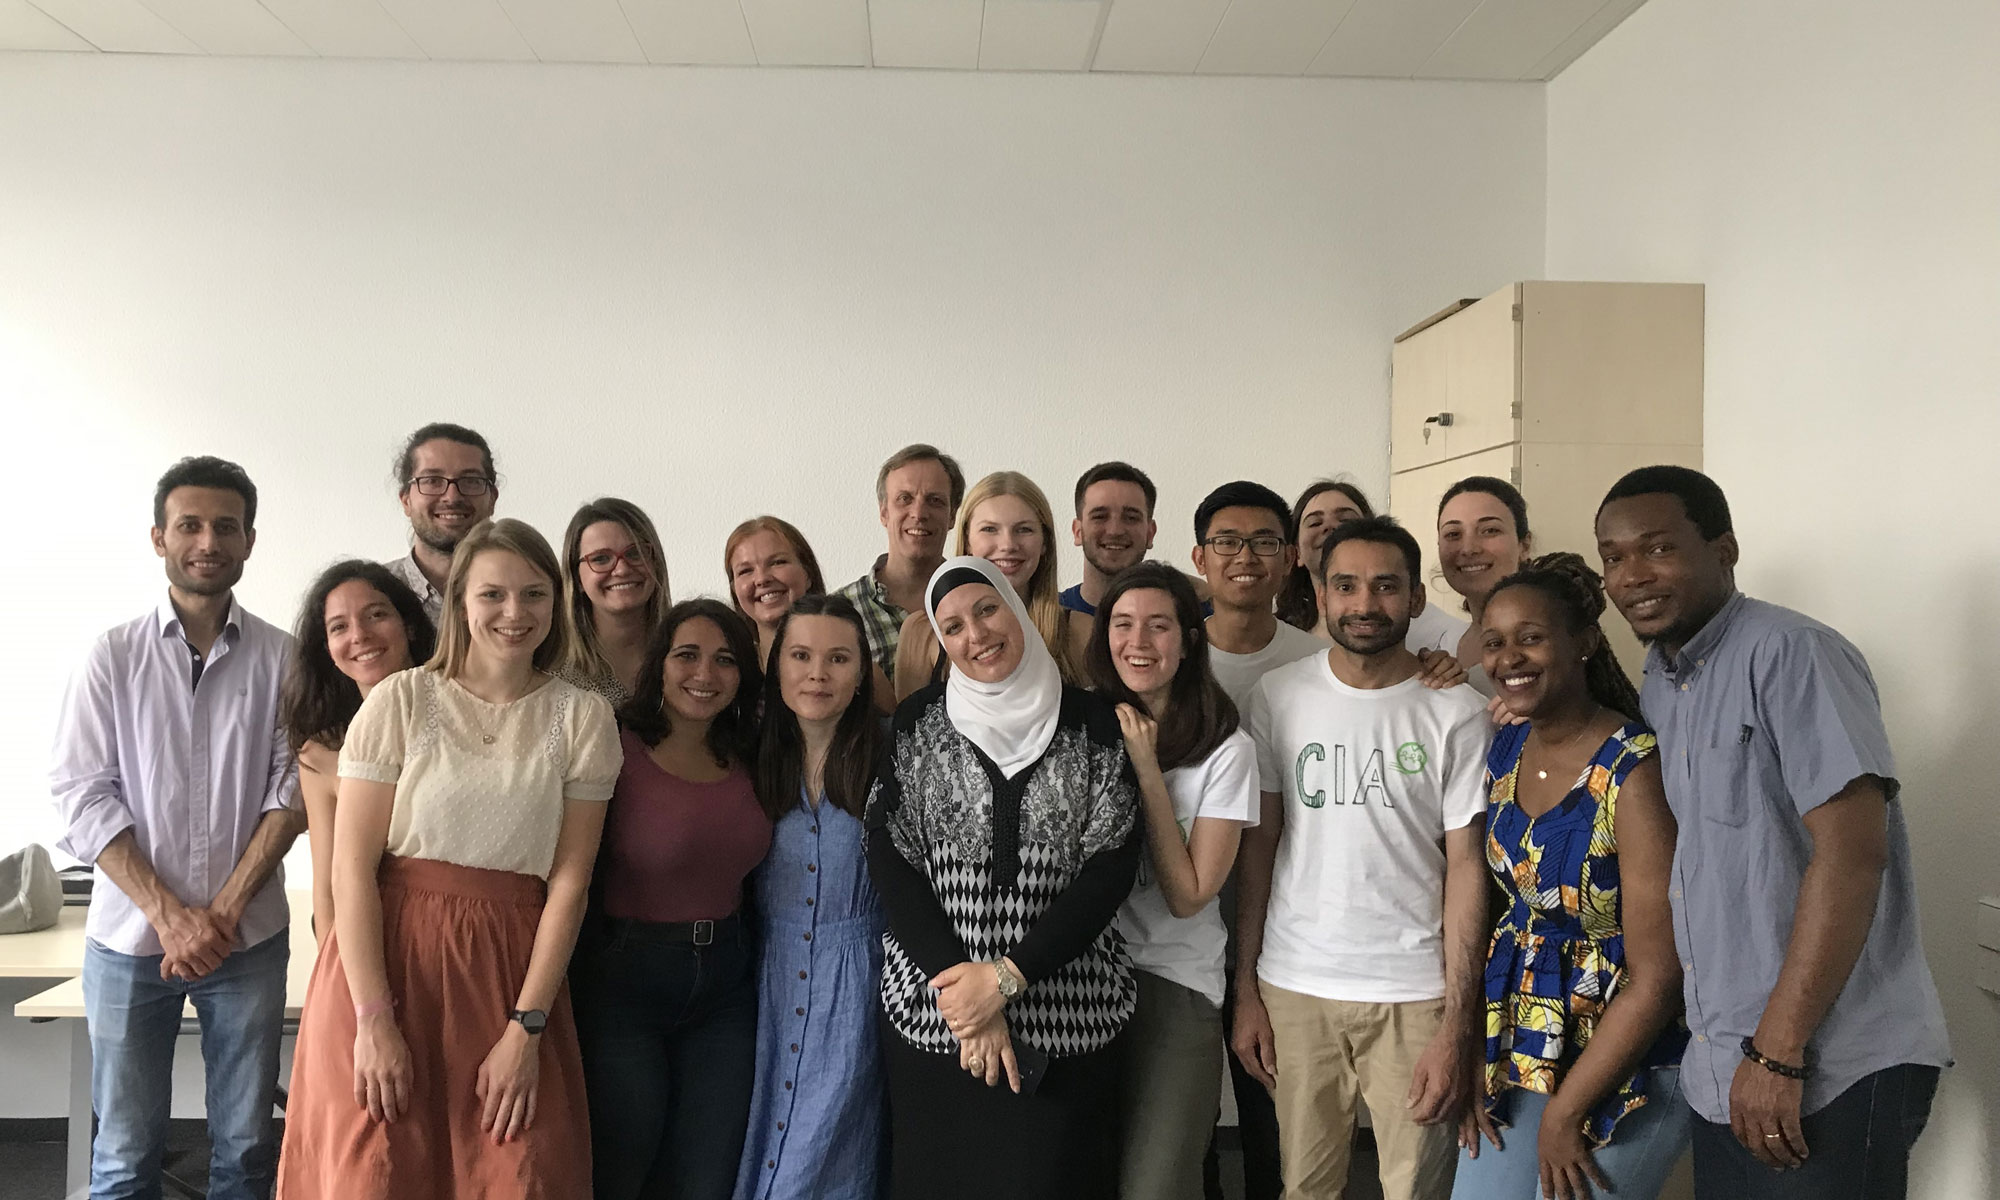 Group photo with the students of the Ruhr-University Bochum from the NOHA (Network on Humanitarian Action) Master 